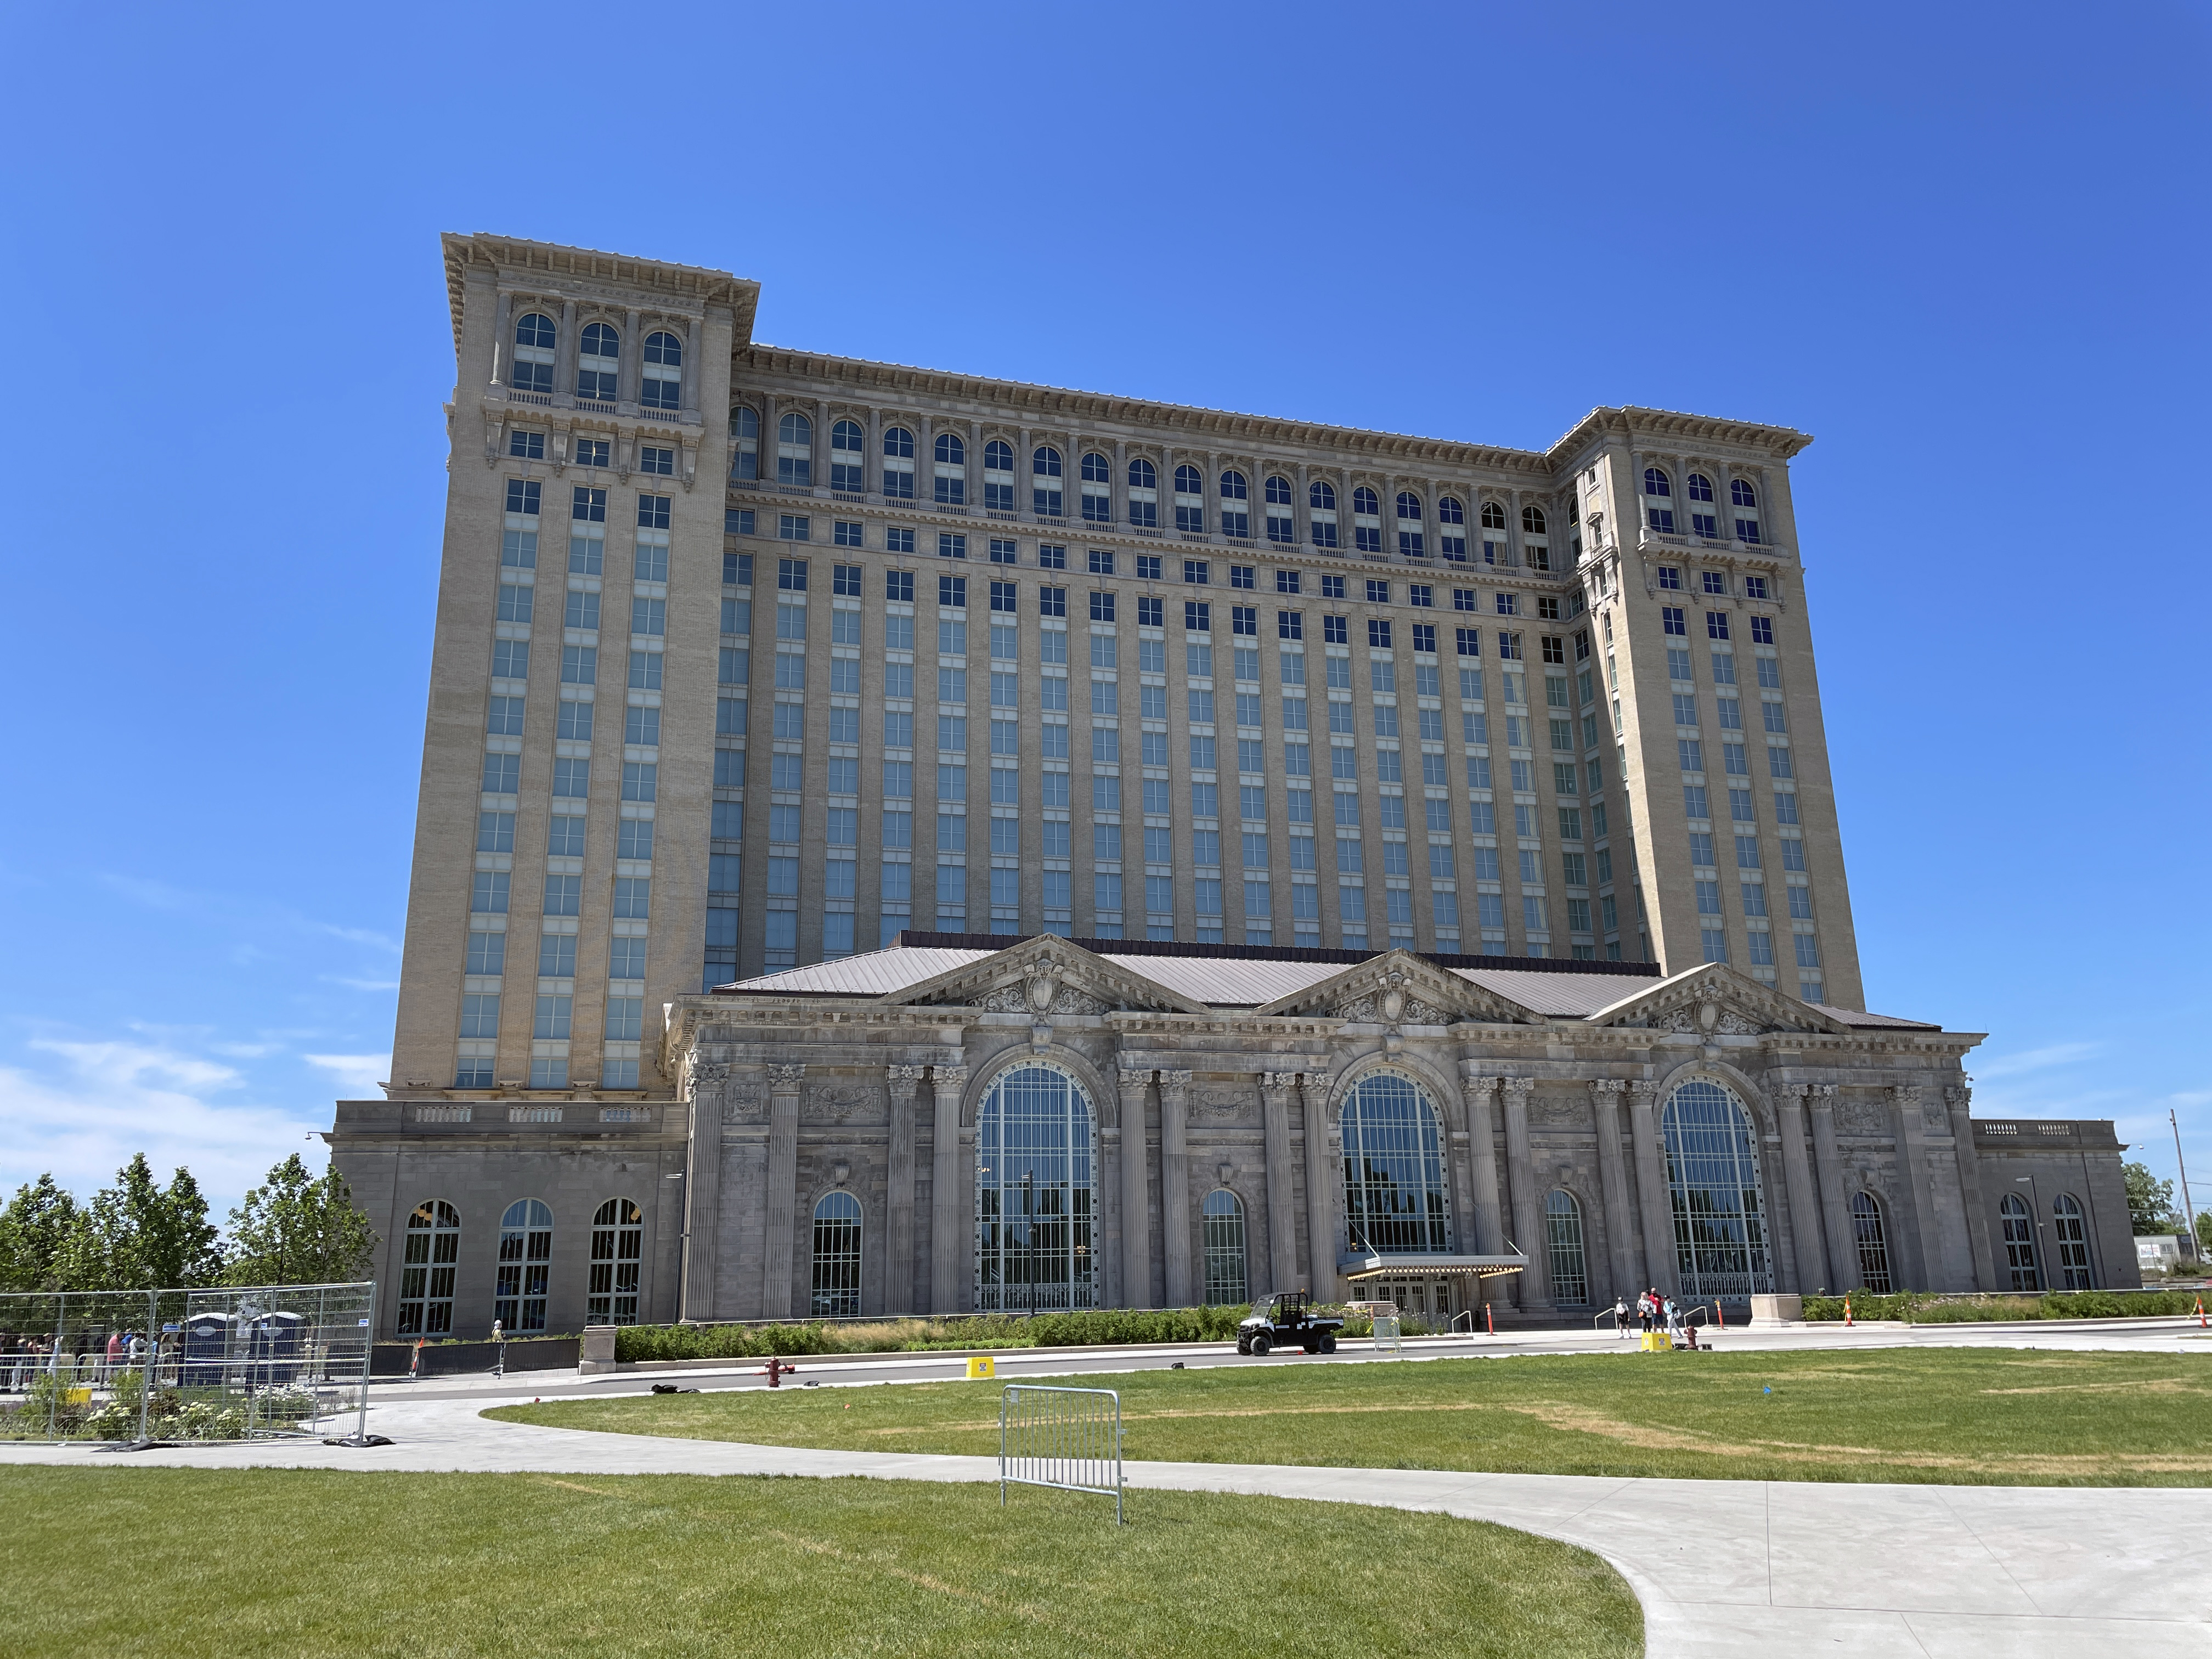 An outdoor photo of the updated Michigan Central Station on a sunny, blue-sky day.